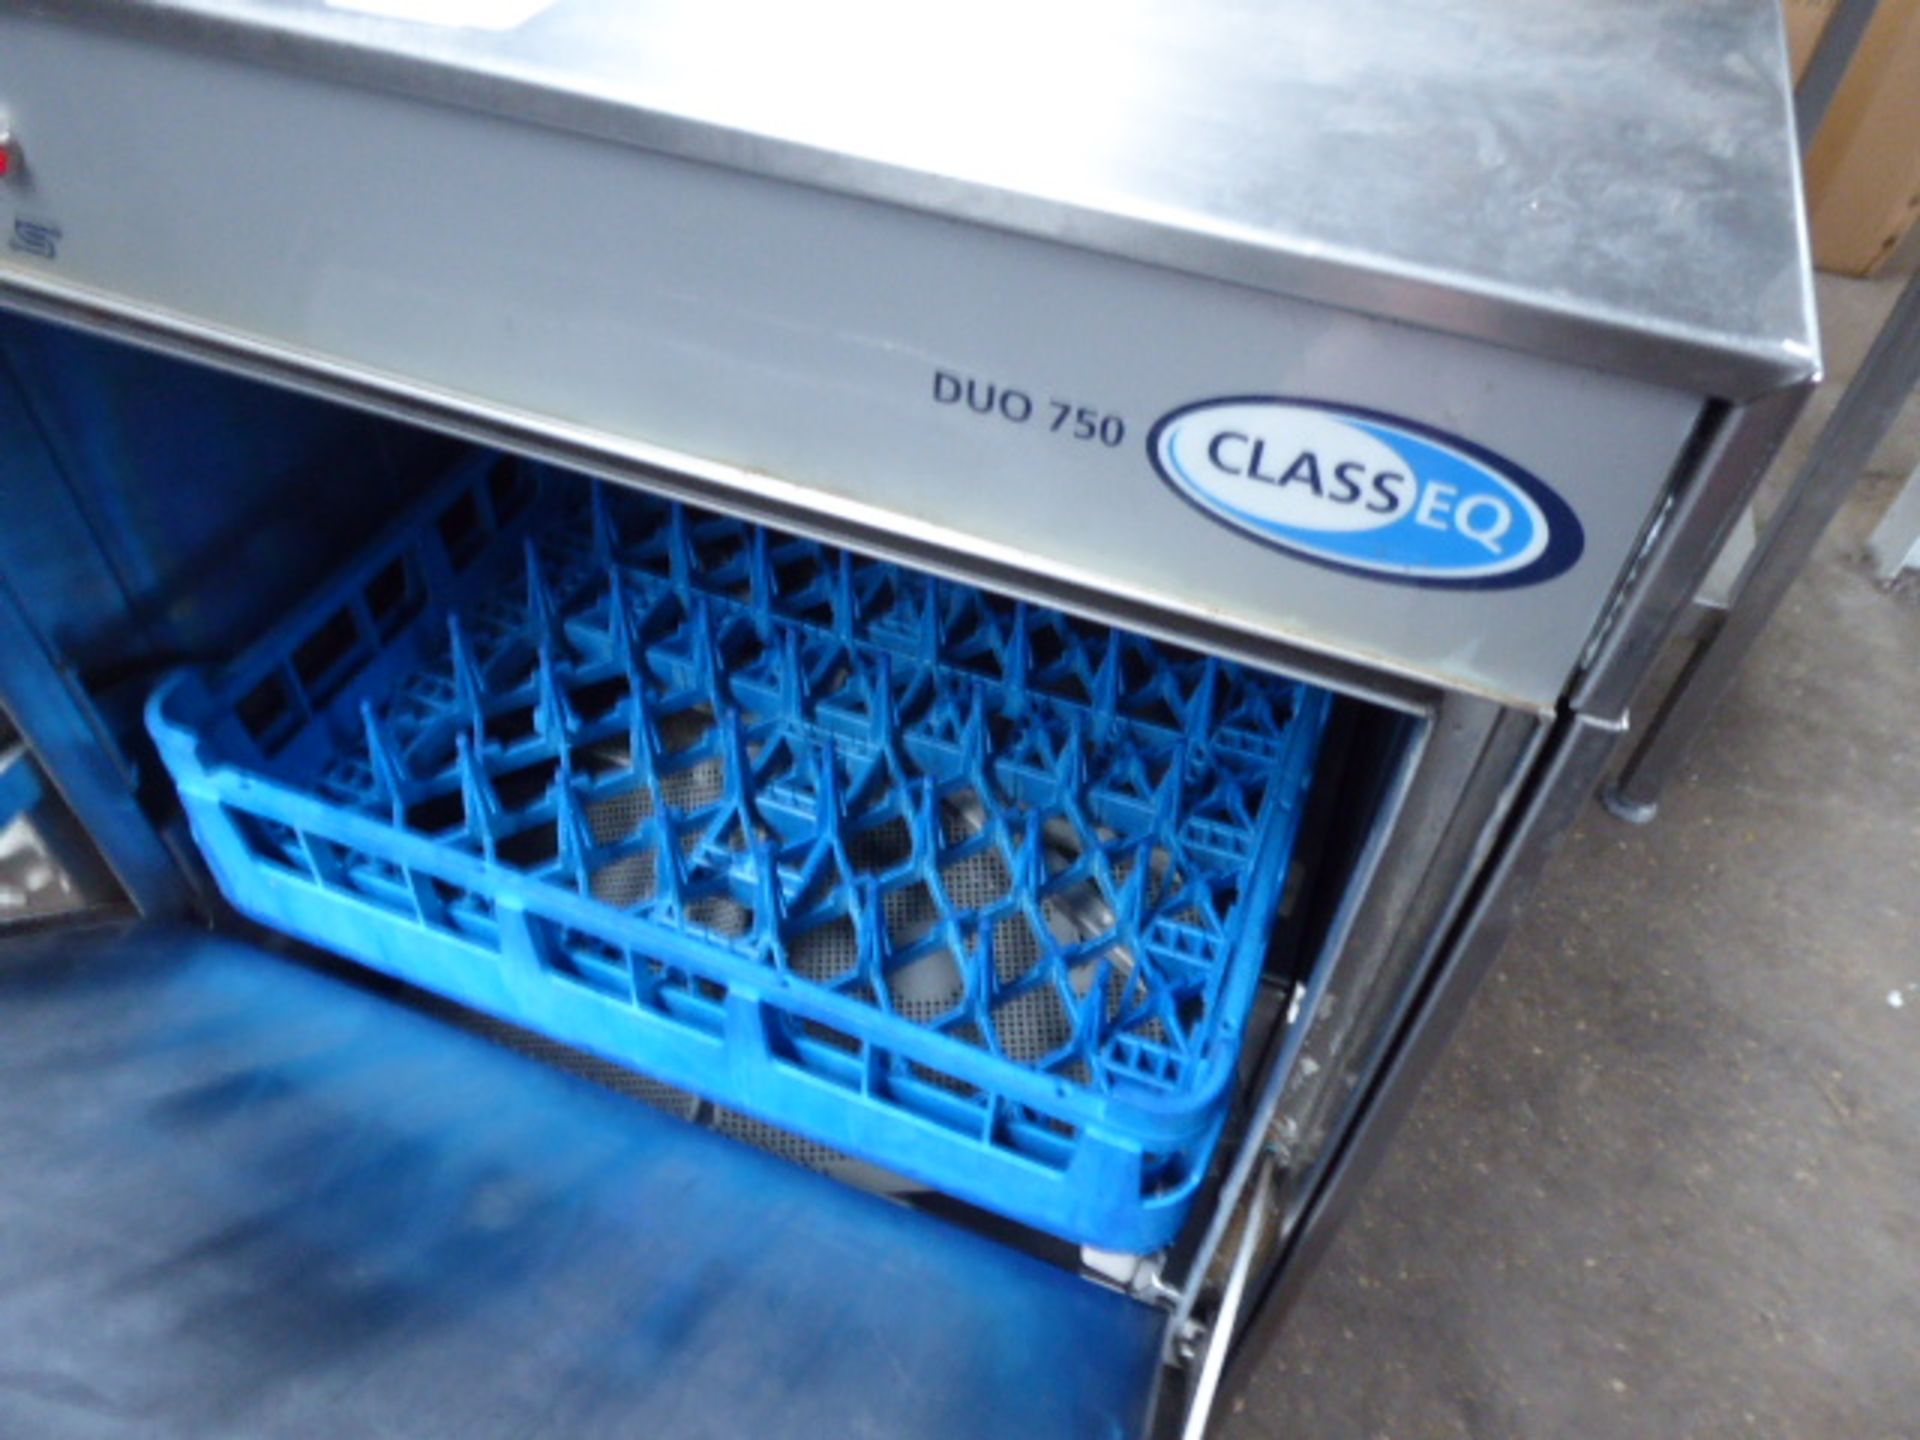 58cm Classeq Duo 750 under counter drop front dishwasher - Image 2 of 2